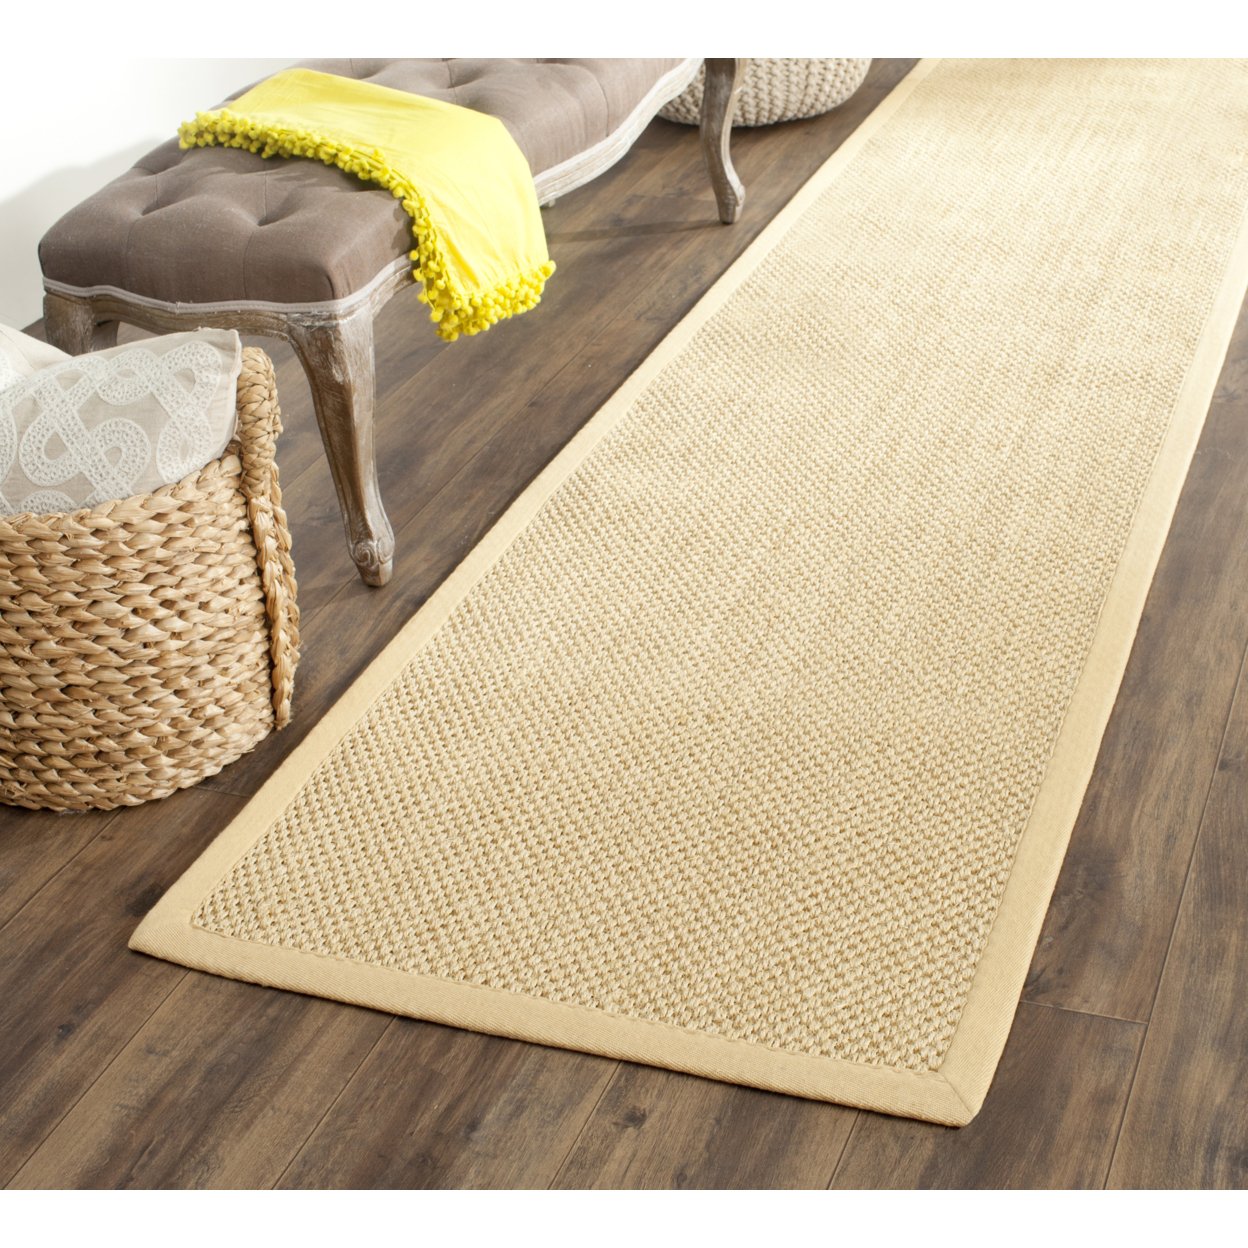 SAFAVIEH Natural Fiber Collection NF443A Maize/Wheat Rug - 9' Square